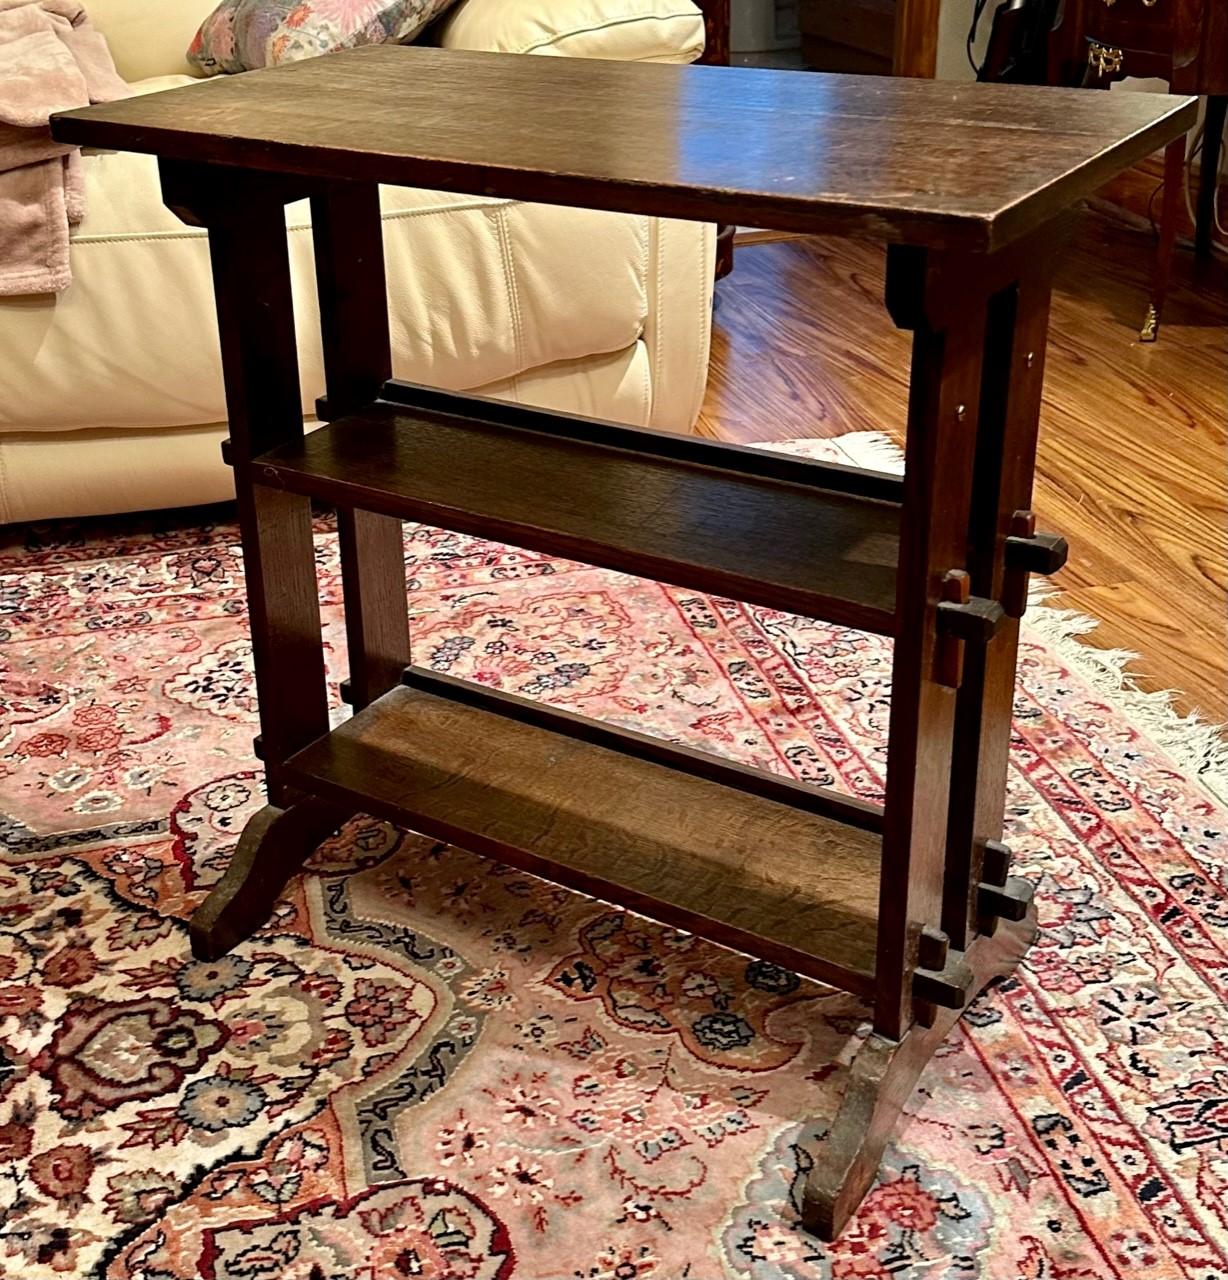 Arts & Crafts Roycroft Little Journey Oak Book Stand circa 1910

Roycroft’s Little Journeys table is constructed with keyed mortise and tenon on three shelves. It is signed with the original metal tag. Overall good condition, tight and sturdy with